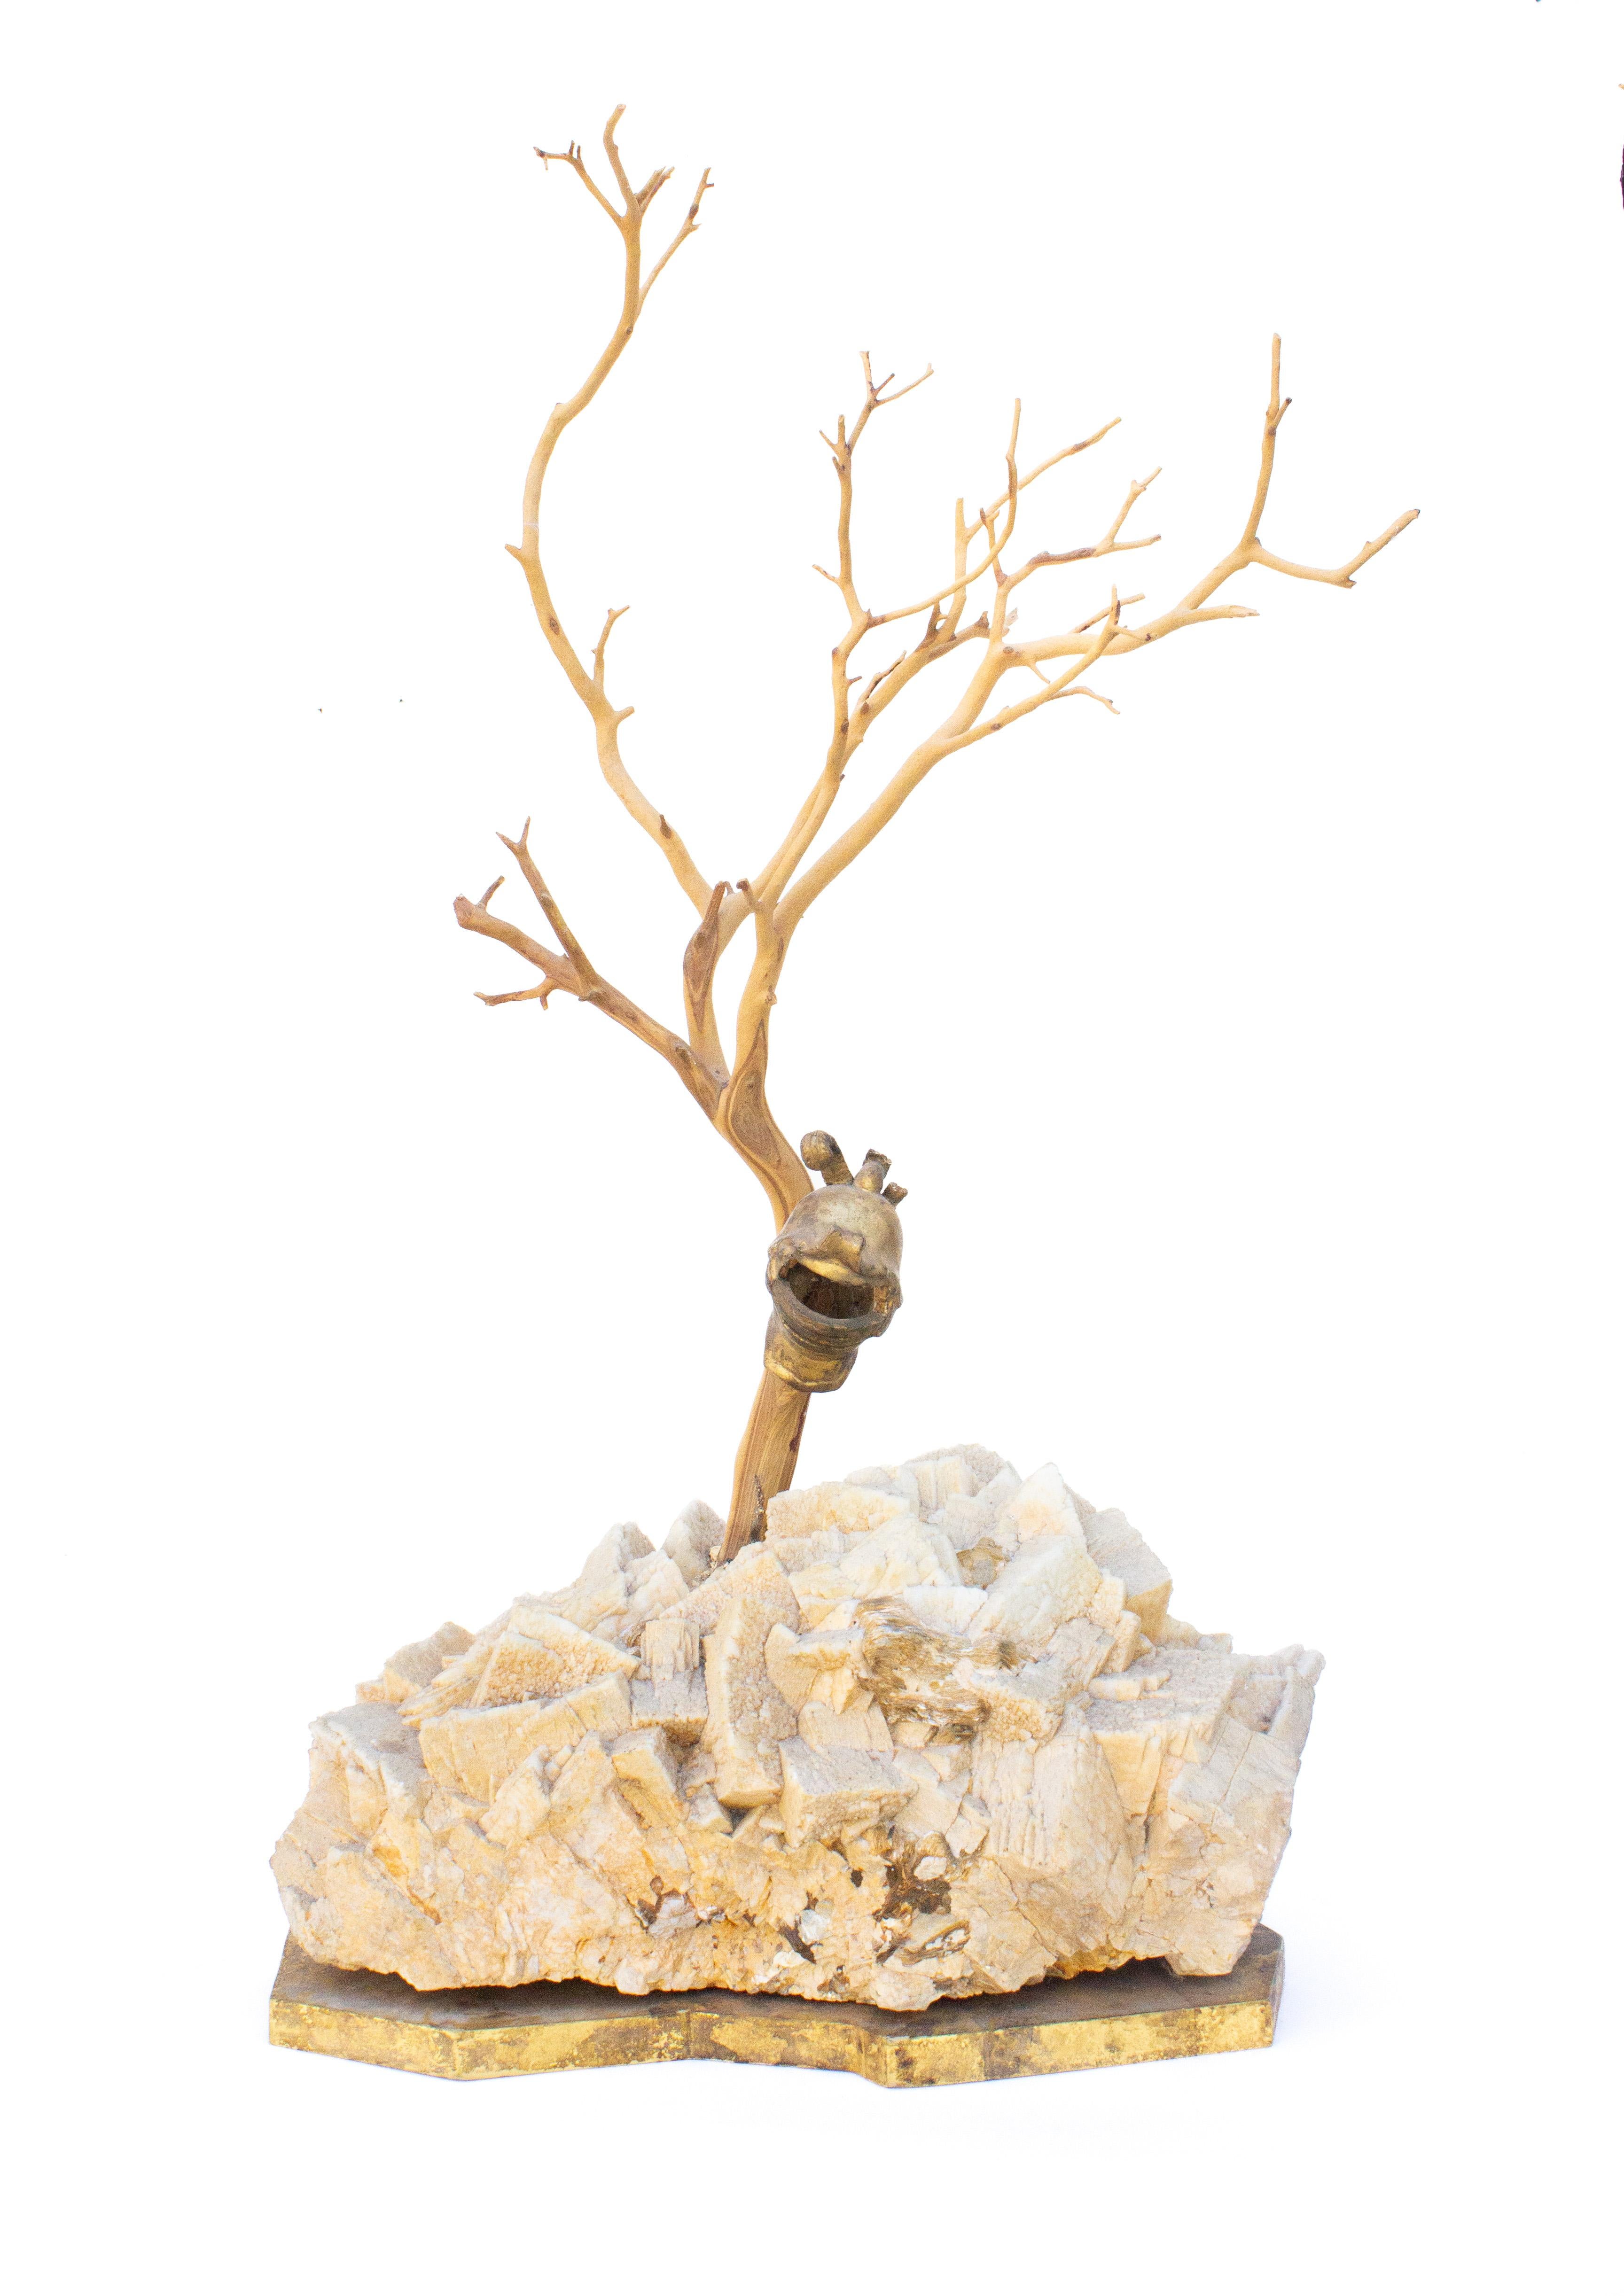 Sculptural tree with an 18th century Italian gold leaf miniature helmet and mounted on a calcite and mica mineral. The helmet is hung on a type of desert wood and is mounted on a calcite and mica mineral which sits on a gold leaf wood base. The wood